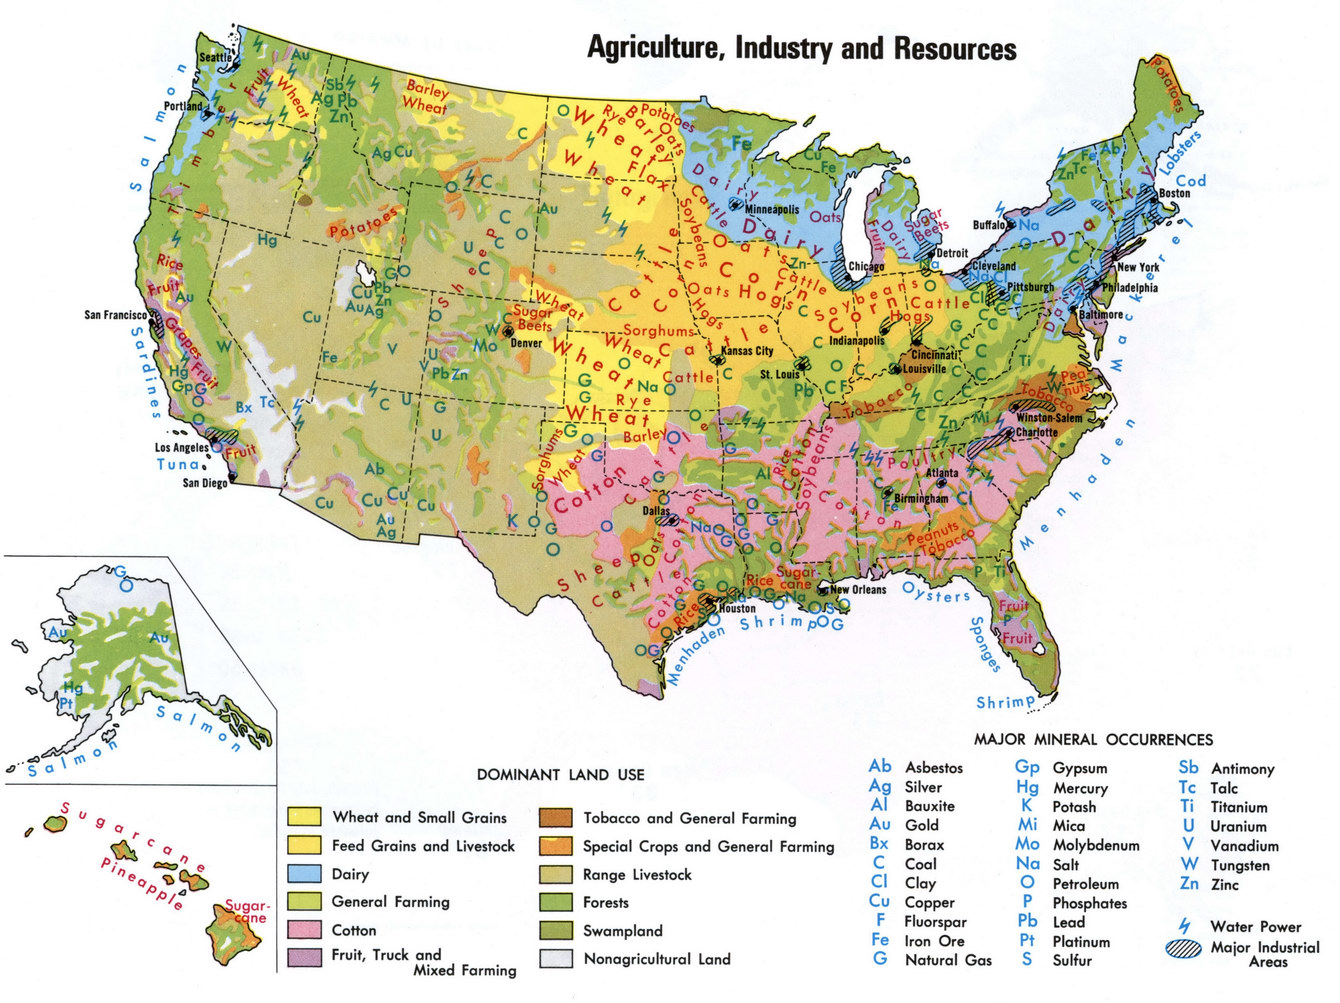 Agriculture, industry and resources of USA